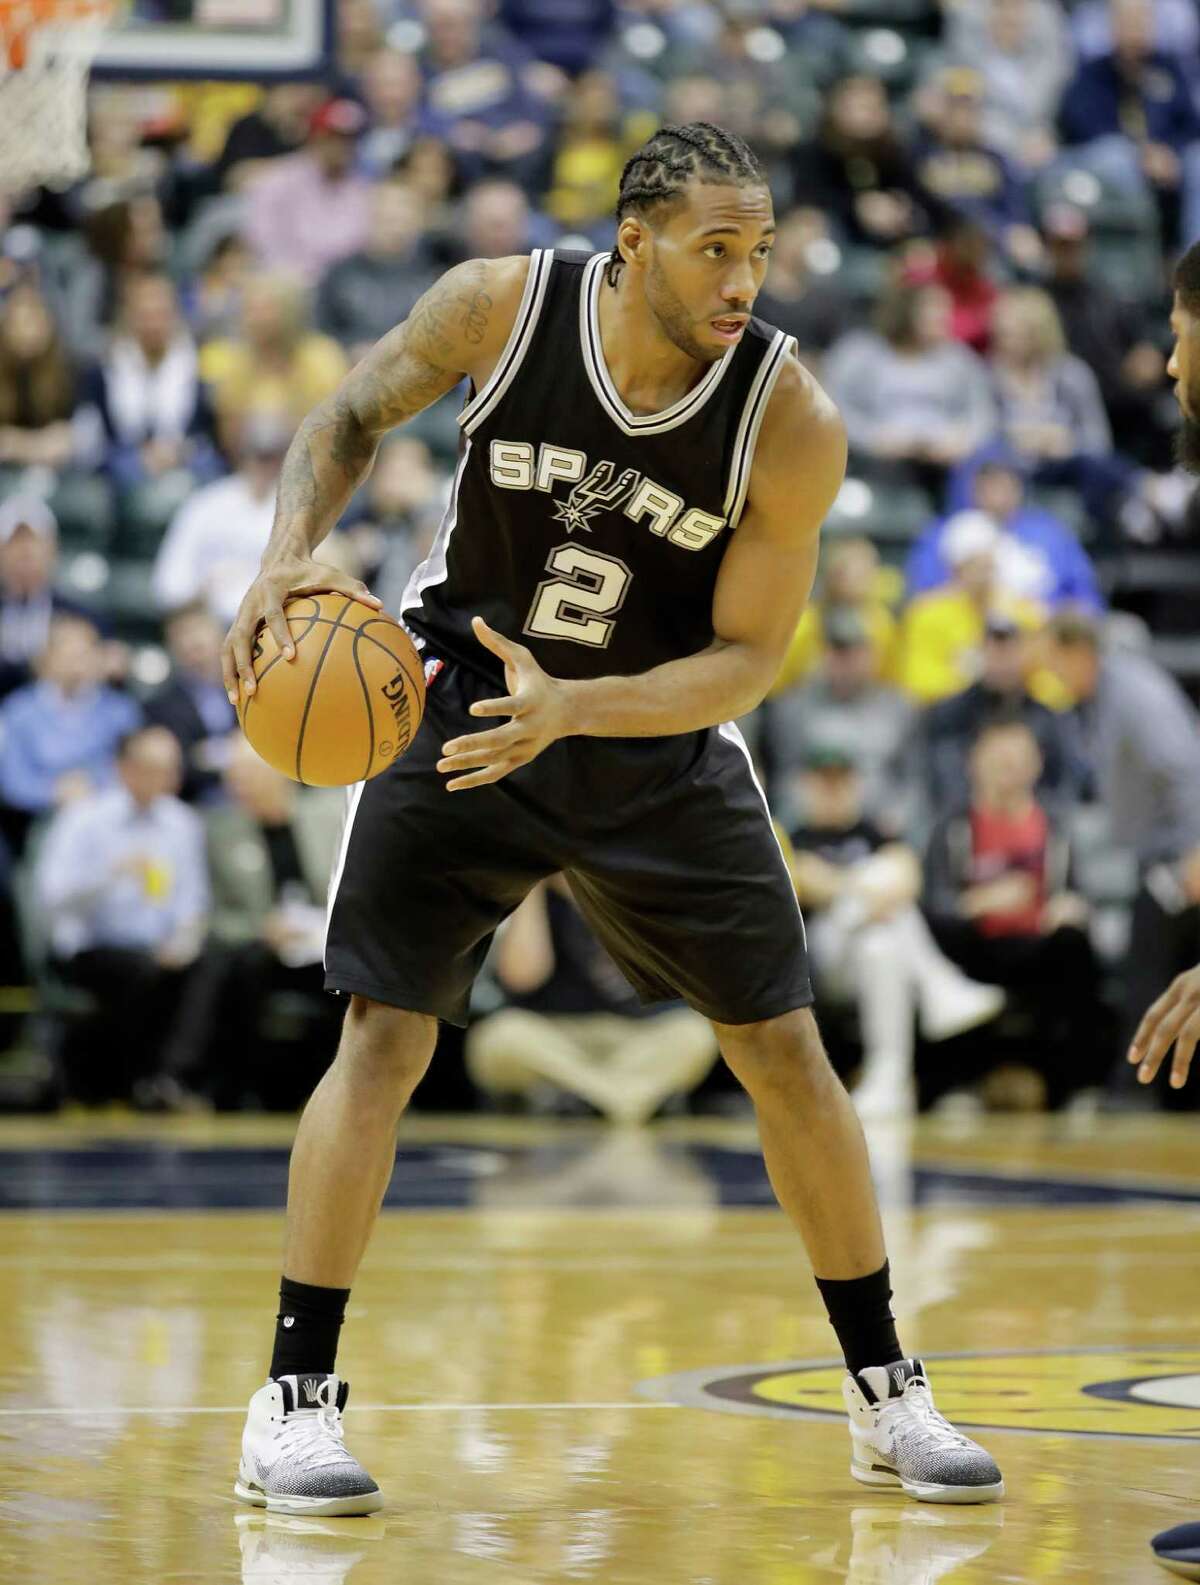 INDIANAPOLIS, IN - FEBRUARY 13: Kawhi Leonard #2 of the San Antonio Spurs dribbles the ball against the Indiana Pacers at Bankers Life Fieldhouse on February 13, 2017 in Indianapolis, Indiana. NOTE TO USER: User expressly acknowledges and agrees that, by downloading and or using this photograph, User is consenting to the terms and conditions of the Getty Images License Agreement